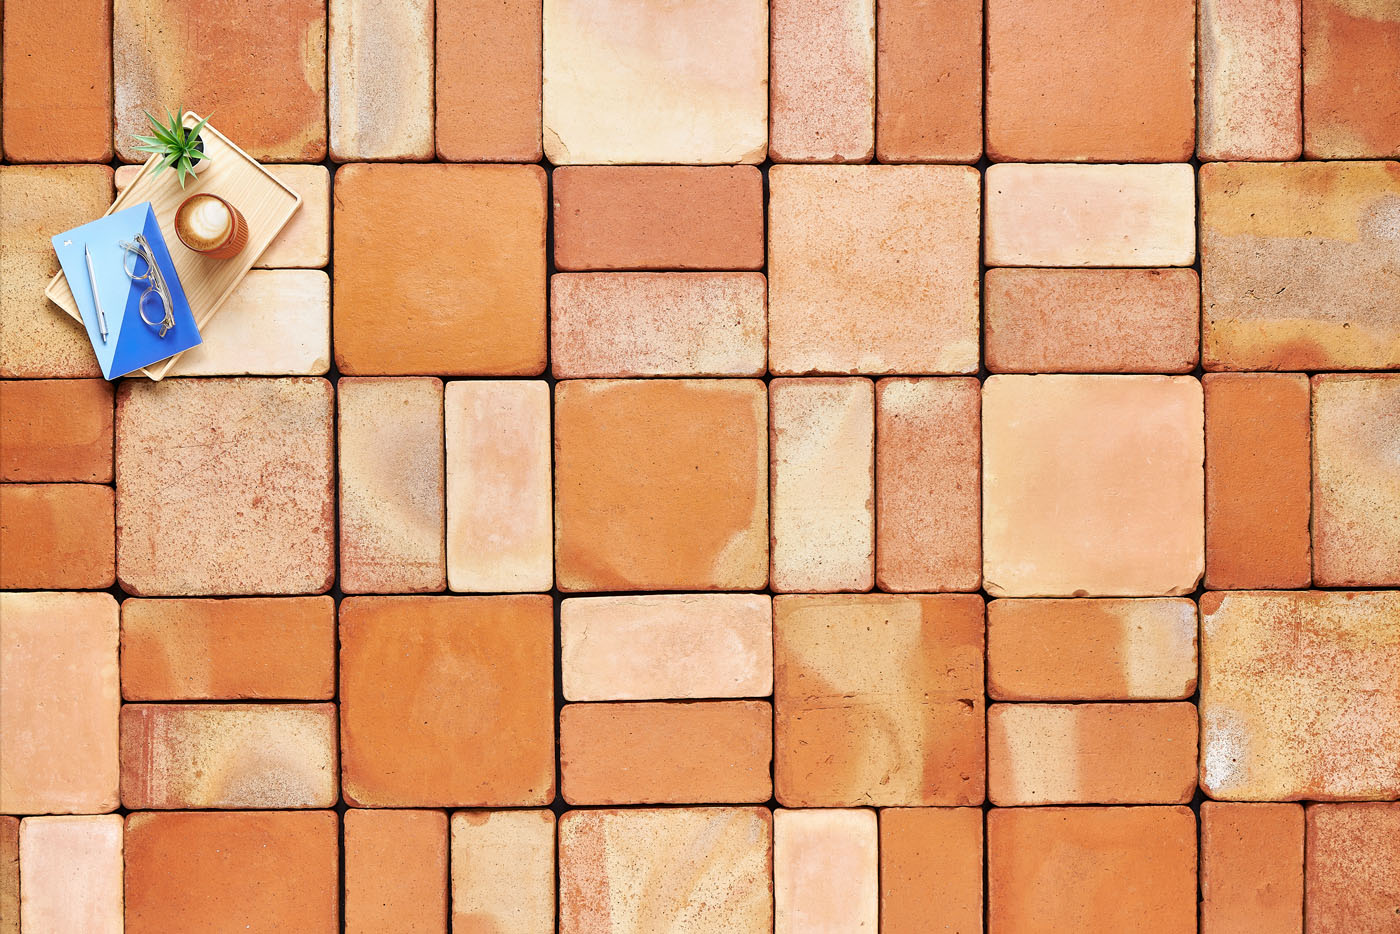 A set of ambar tiles arranged in squares and rectangles.